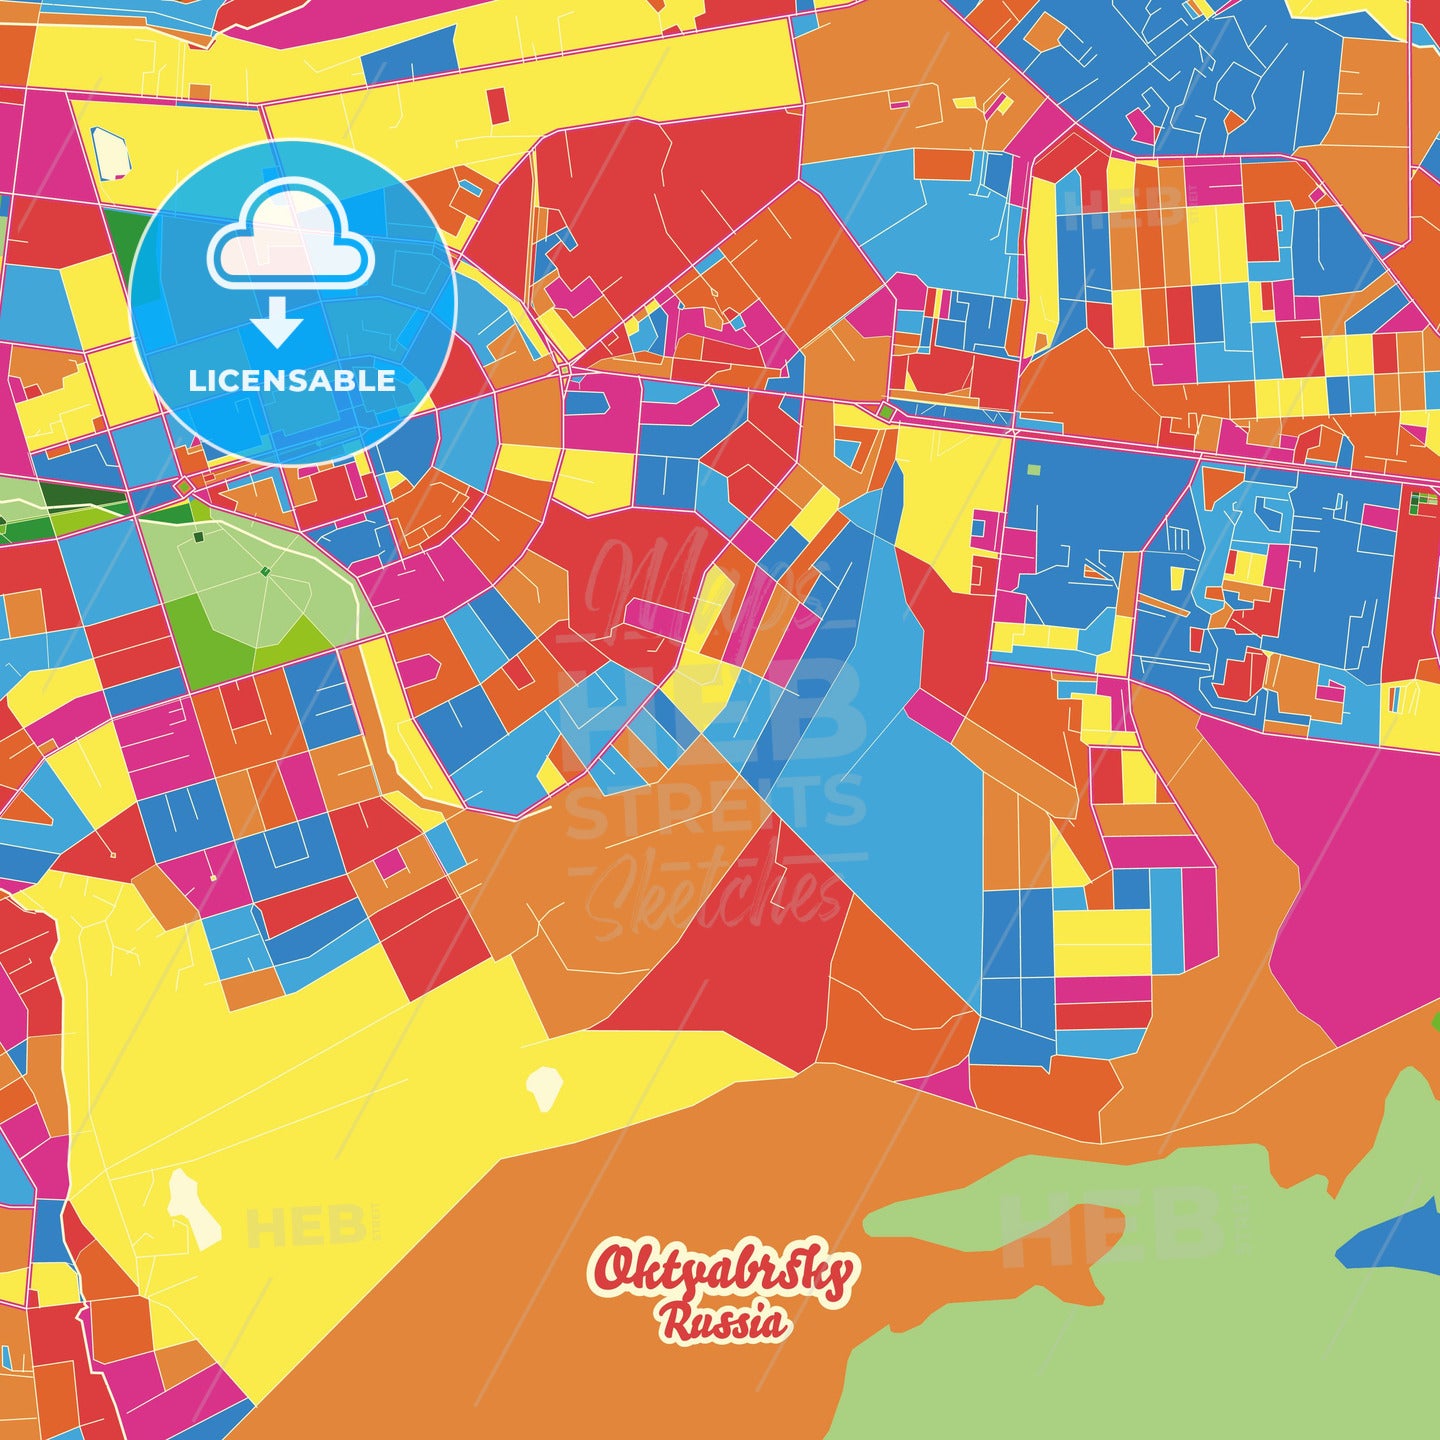 Oktyabrsky, Russia Crazy Colorful Street Map Poster Template - HEBSTREITS Sketches